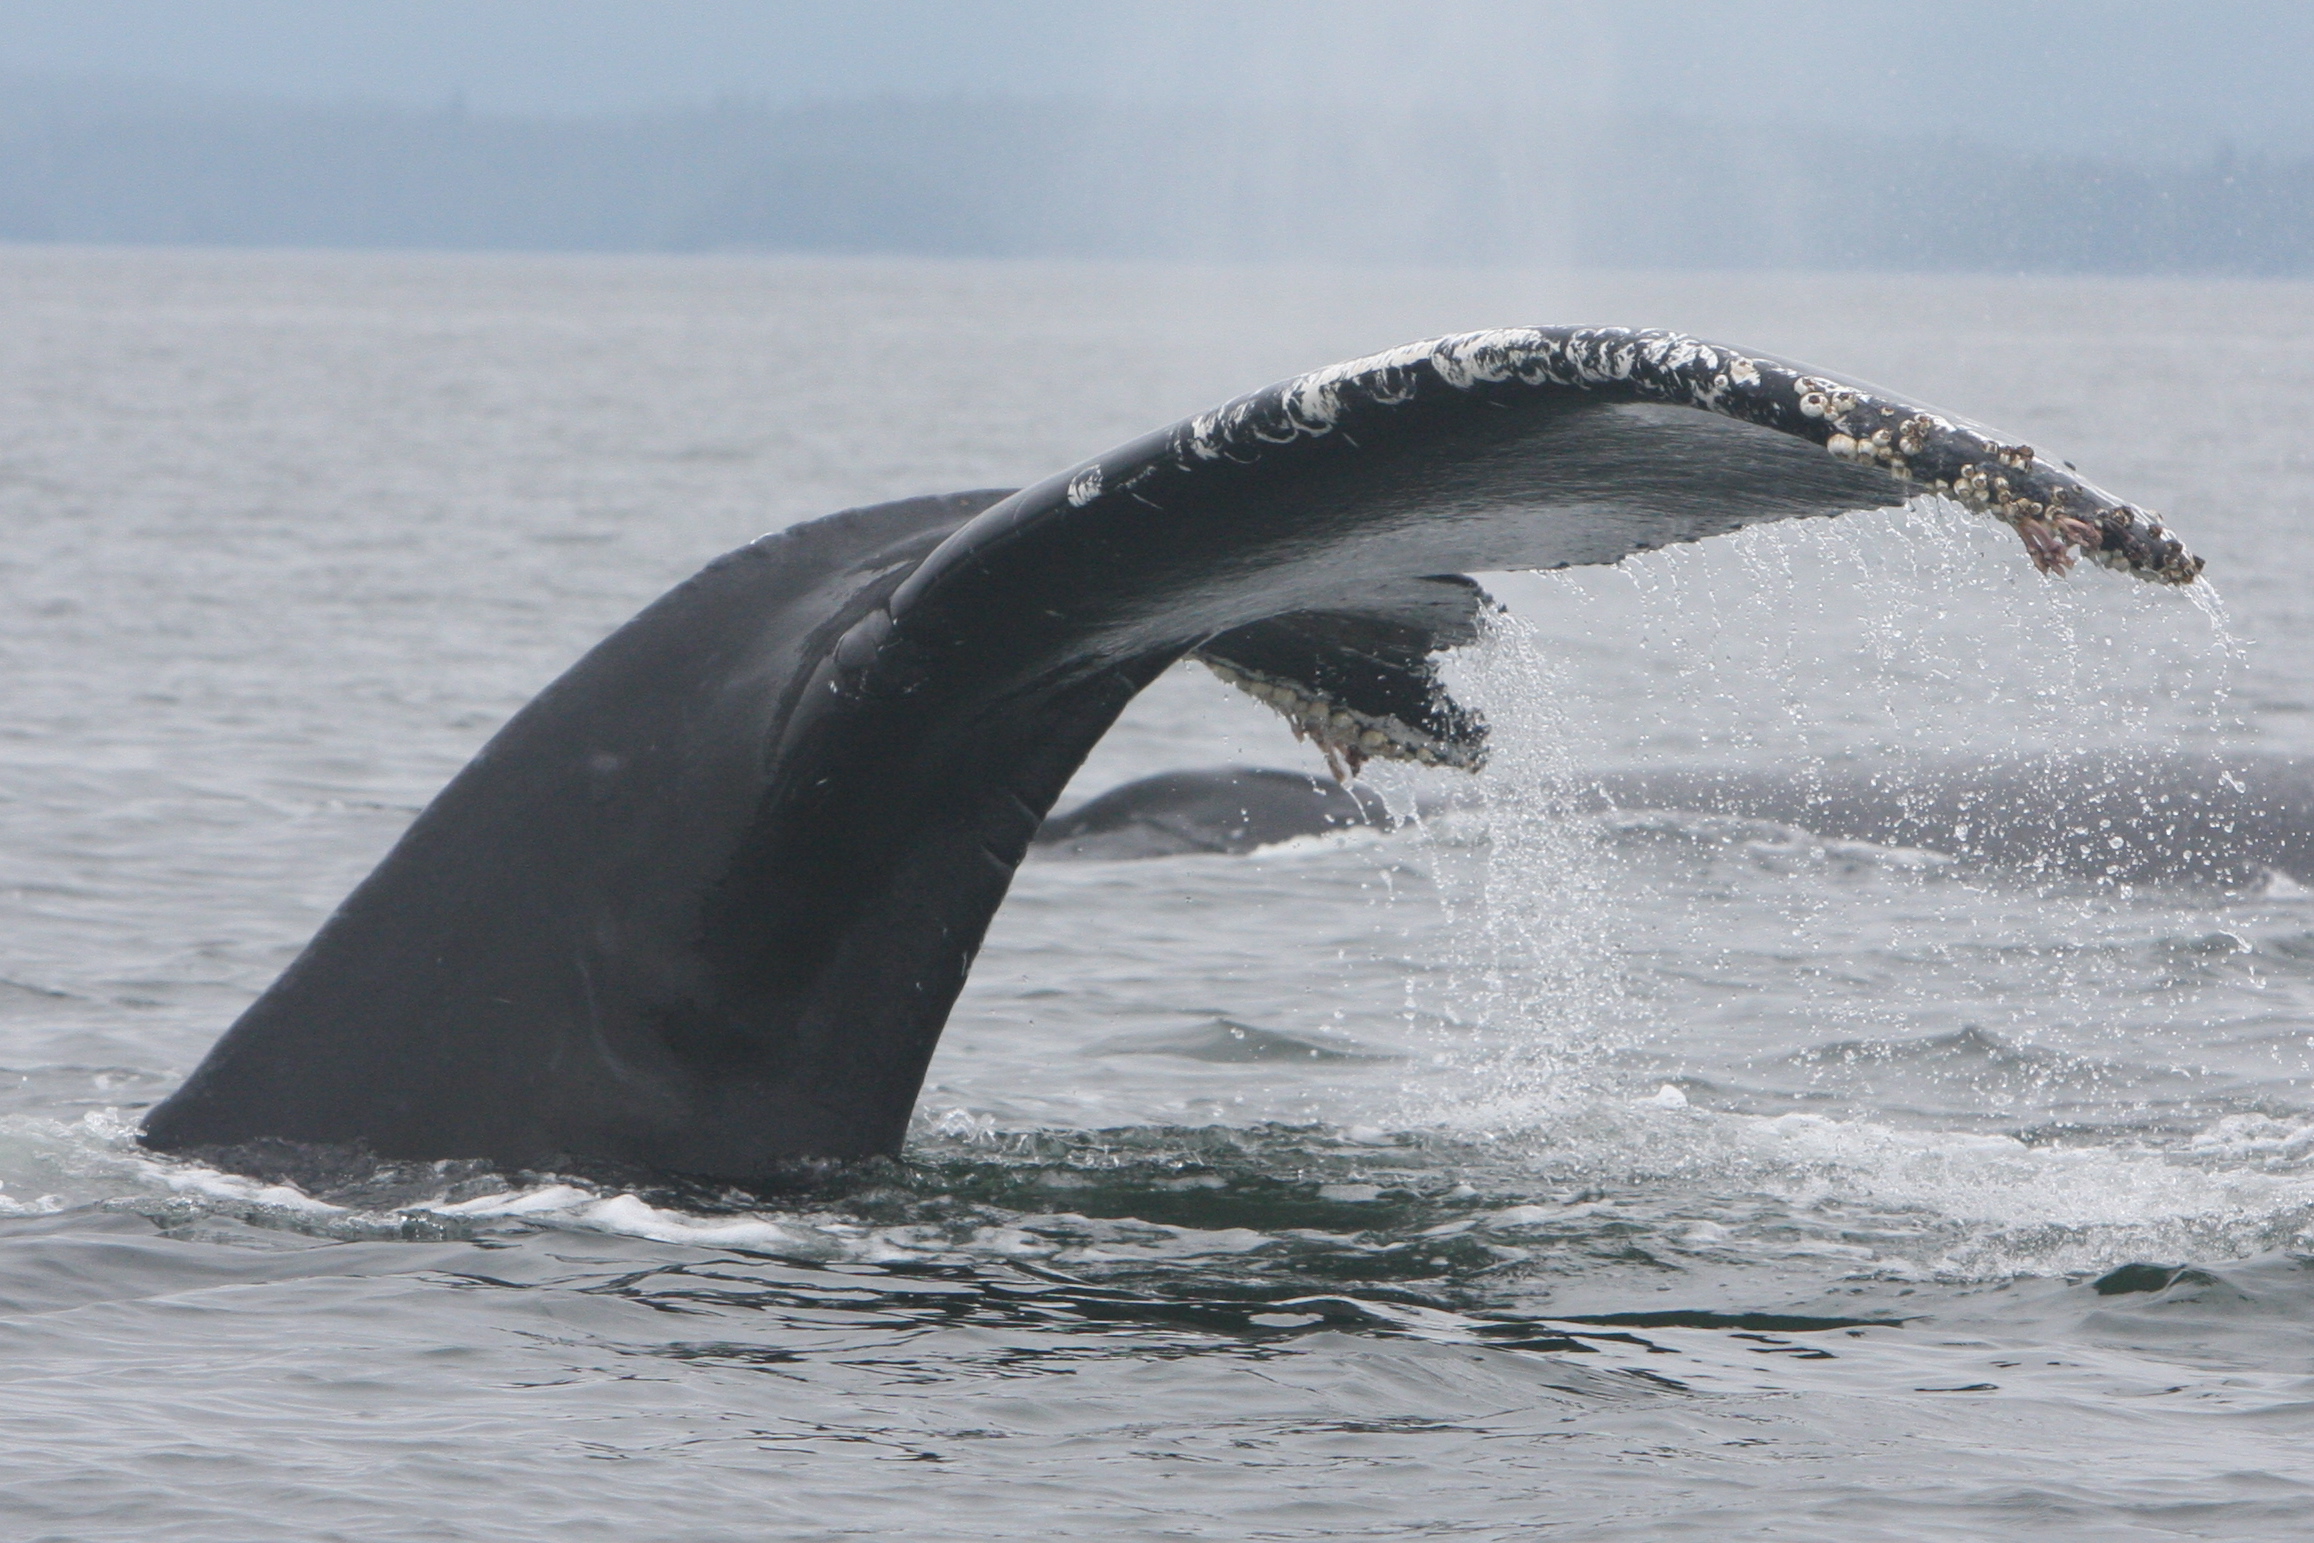 Humpback whale tailstock, with scarring indicative of a previous entanglement (photo: Jared Towers, MERS)